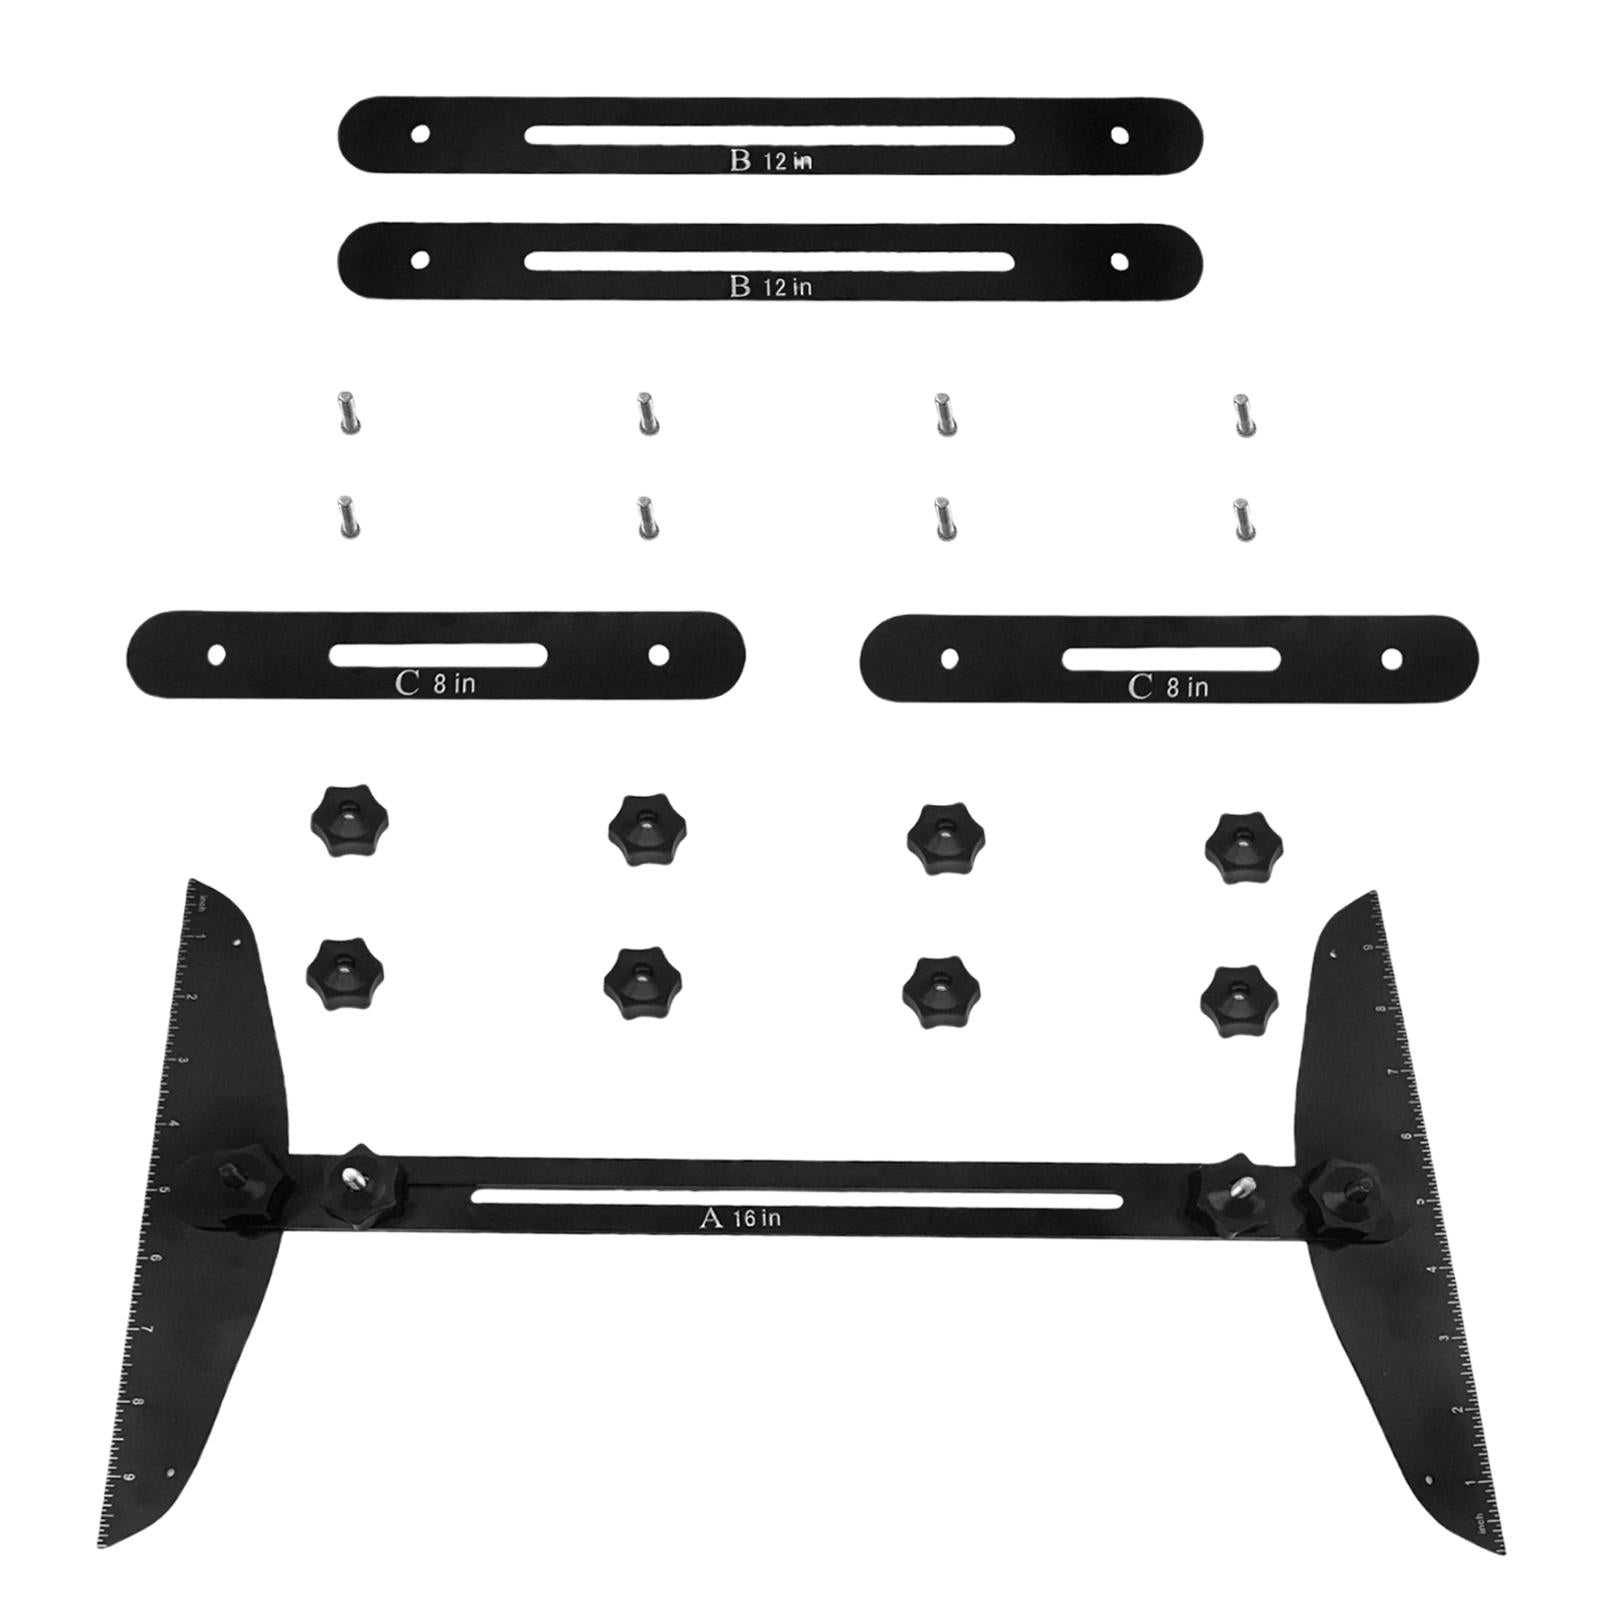 Stair Treads Gauge Template Shelf Scribe Tool for Stairs Risers Black